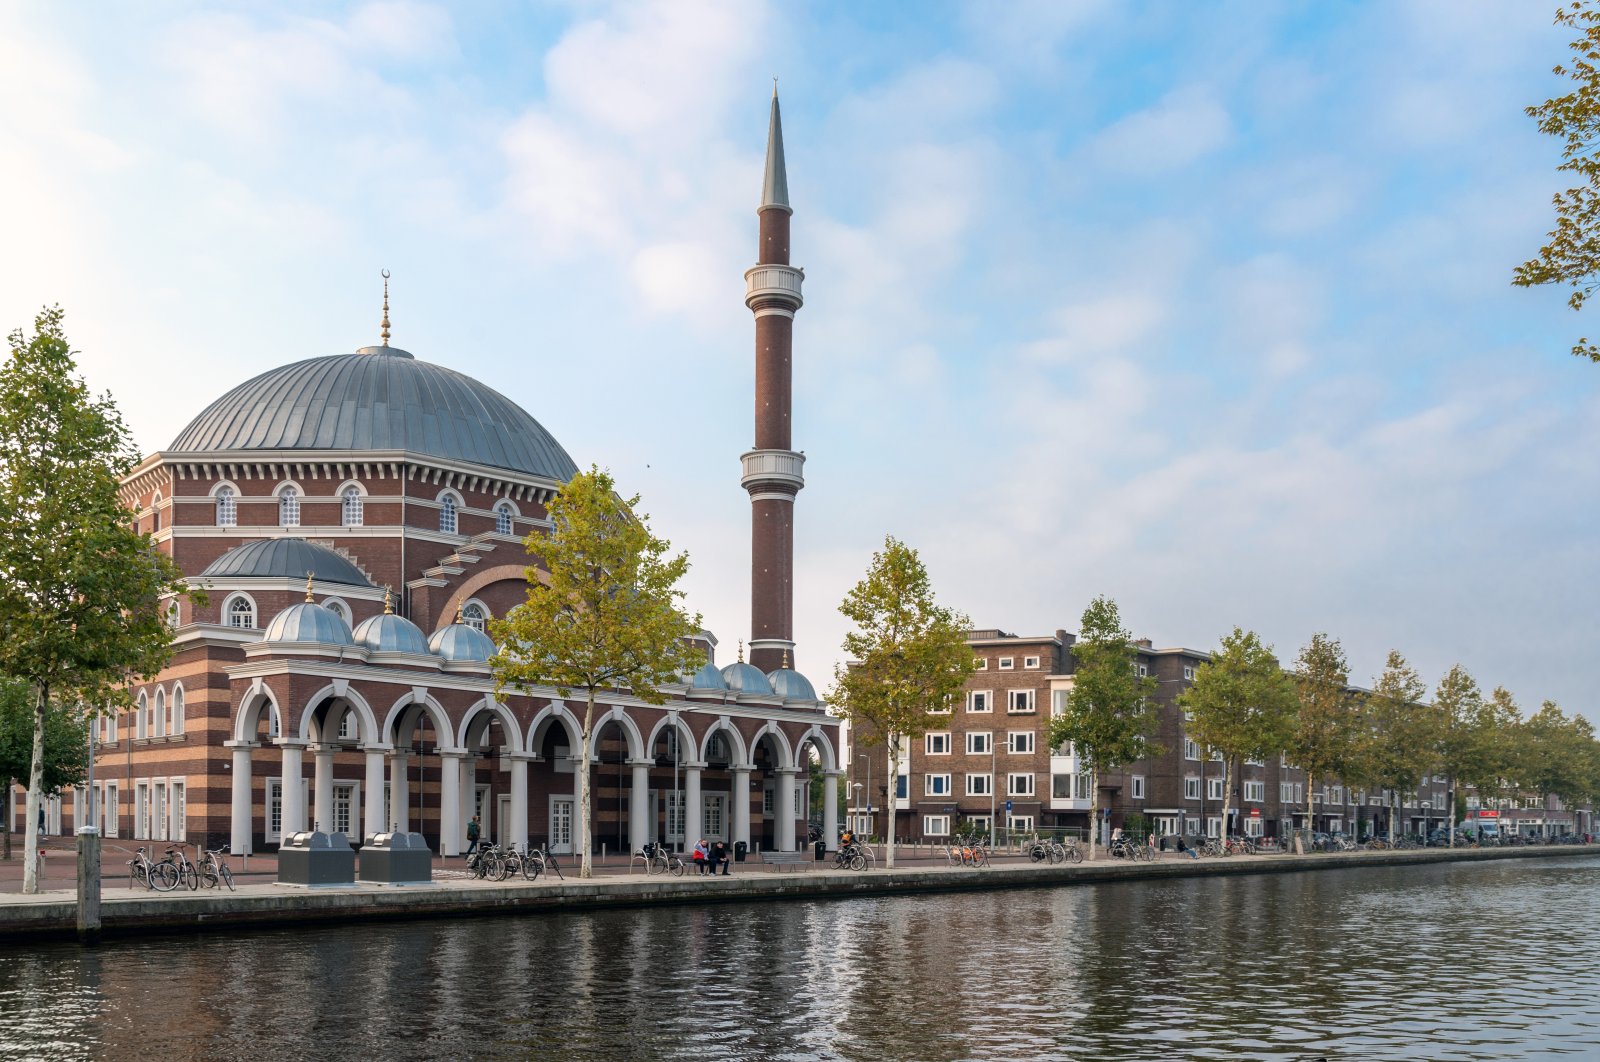 The Westermoskee Aya Sofya mosque in Amsterdam, Sept. 26, 2017. (Getty Images)